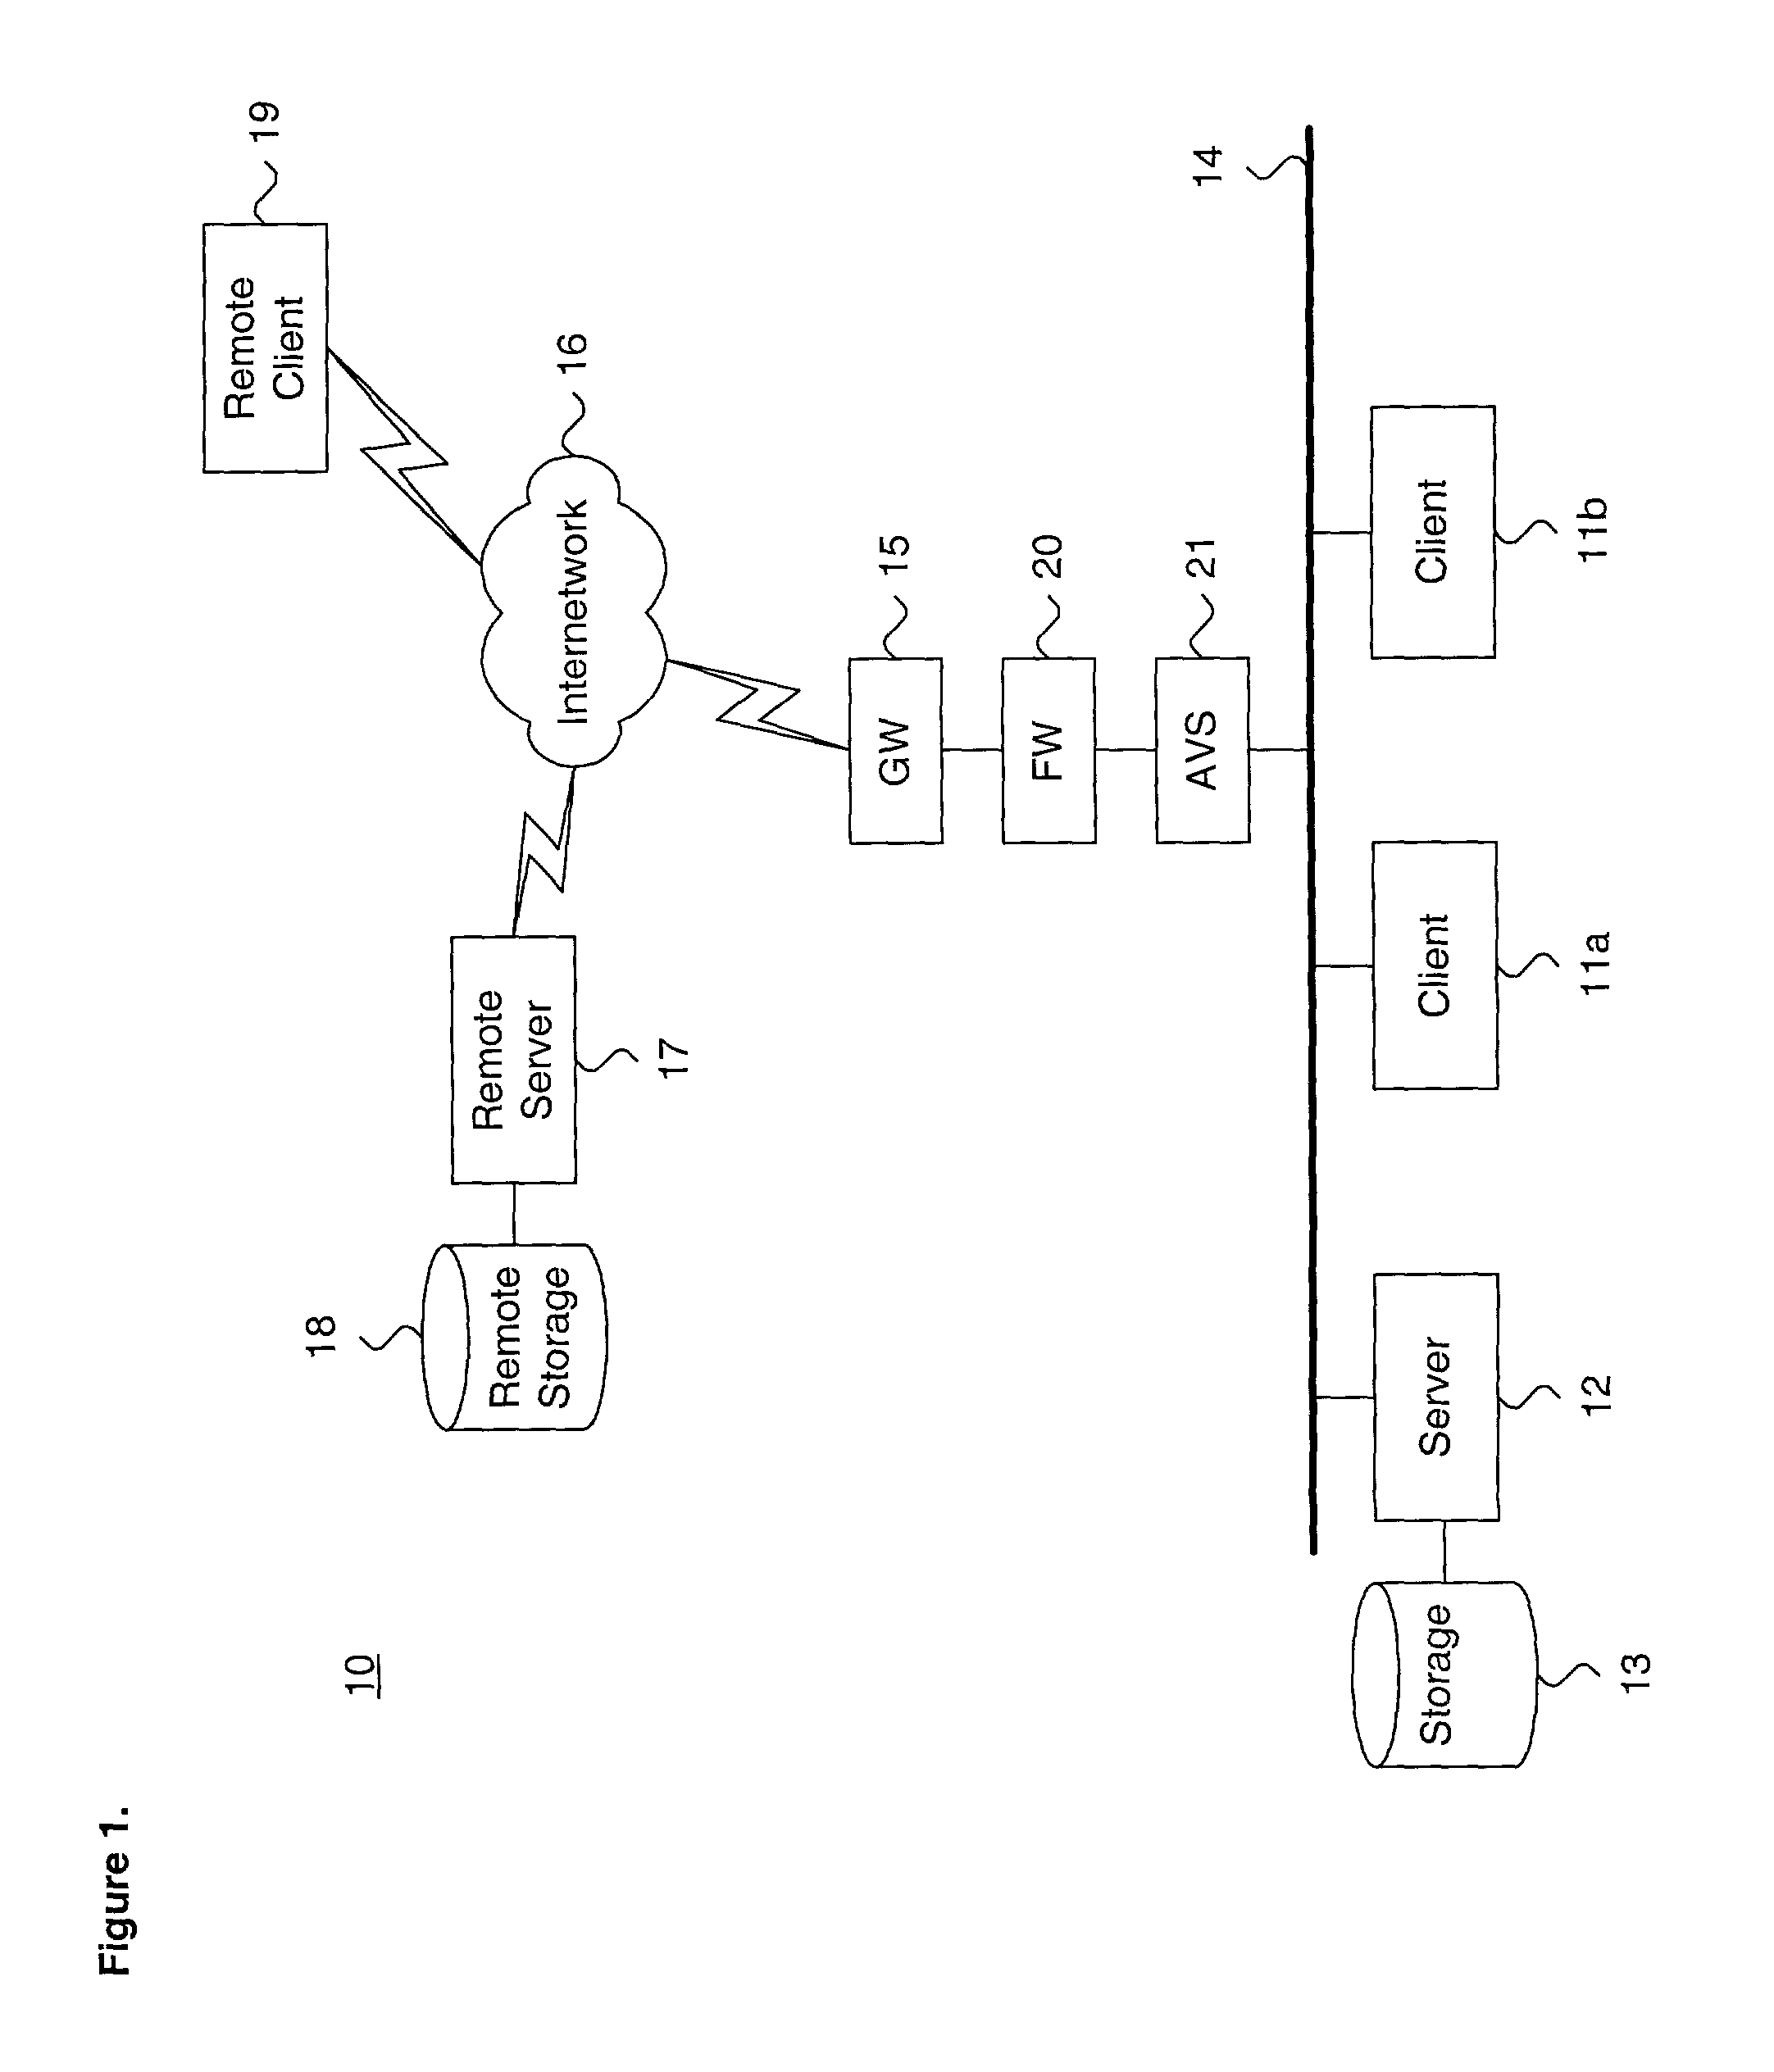 System and method for providing dynamic screening of transient messages in a distributed computing environment